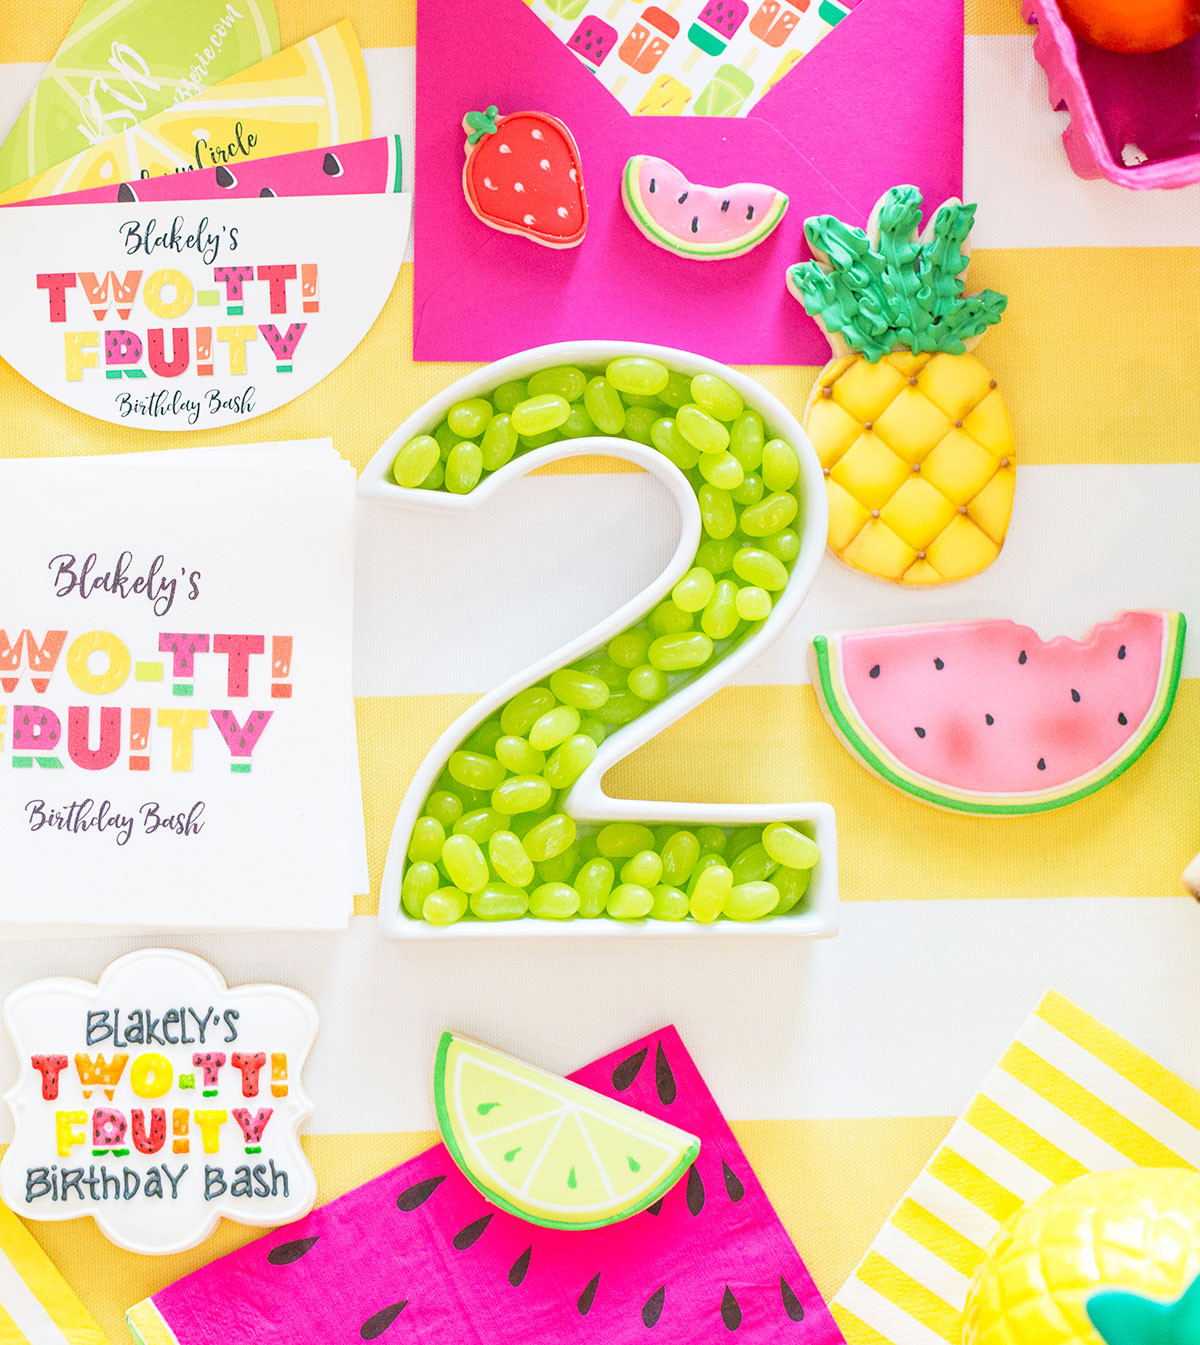 2 Year Old Birthday Party Ideas Summer
 Two tti Fruity Birthday Party Blakely Turns 2